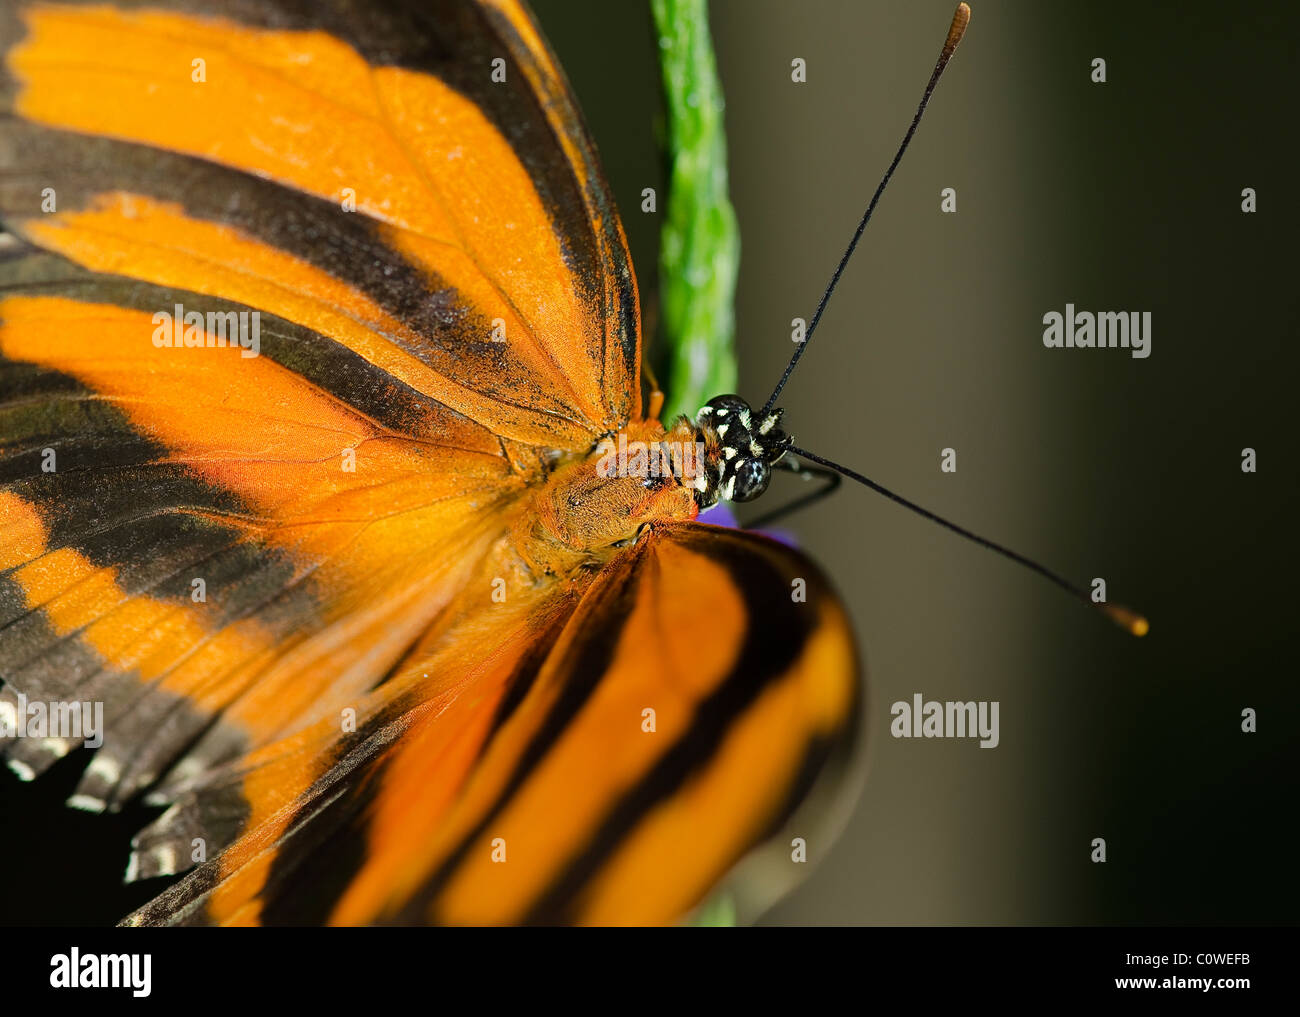 Photo of a Banded Orange Butterfly, Nymphalidae family, common through Brazil to central Mexico Stock Photo